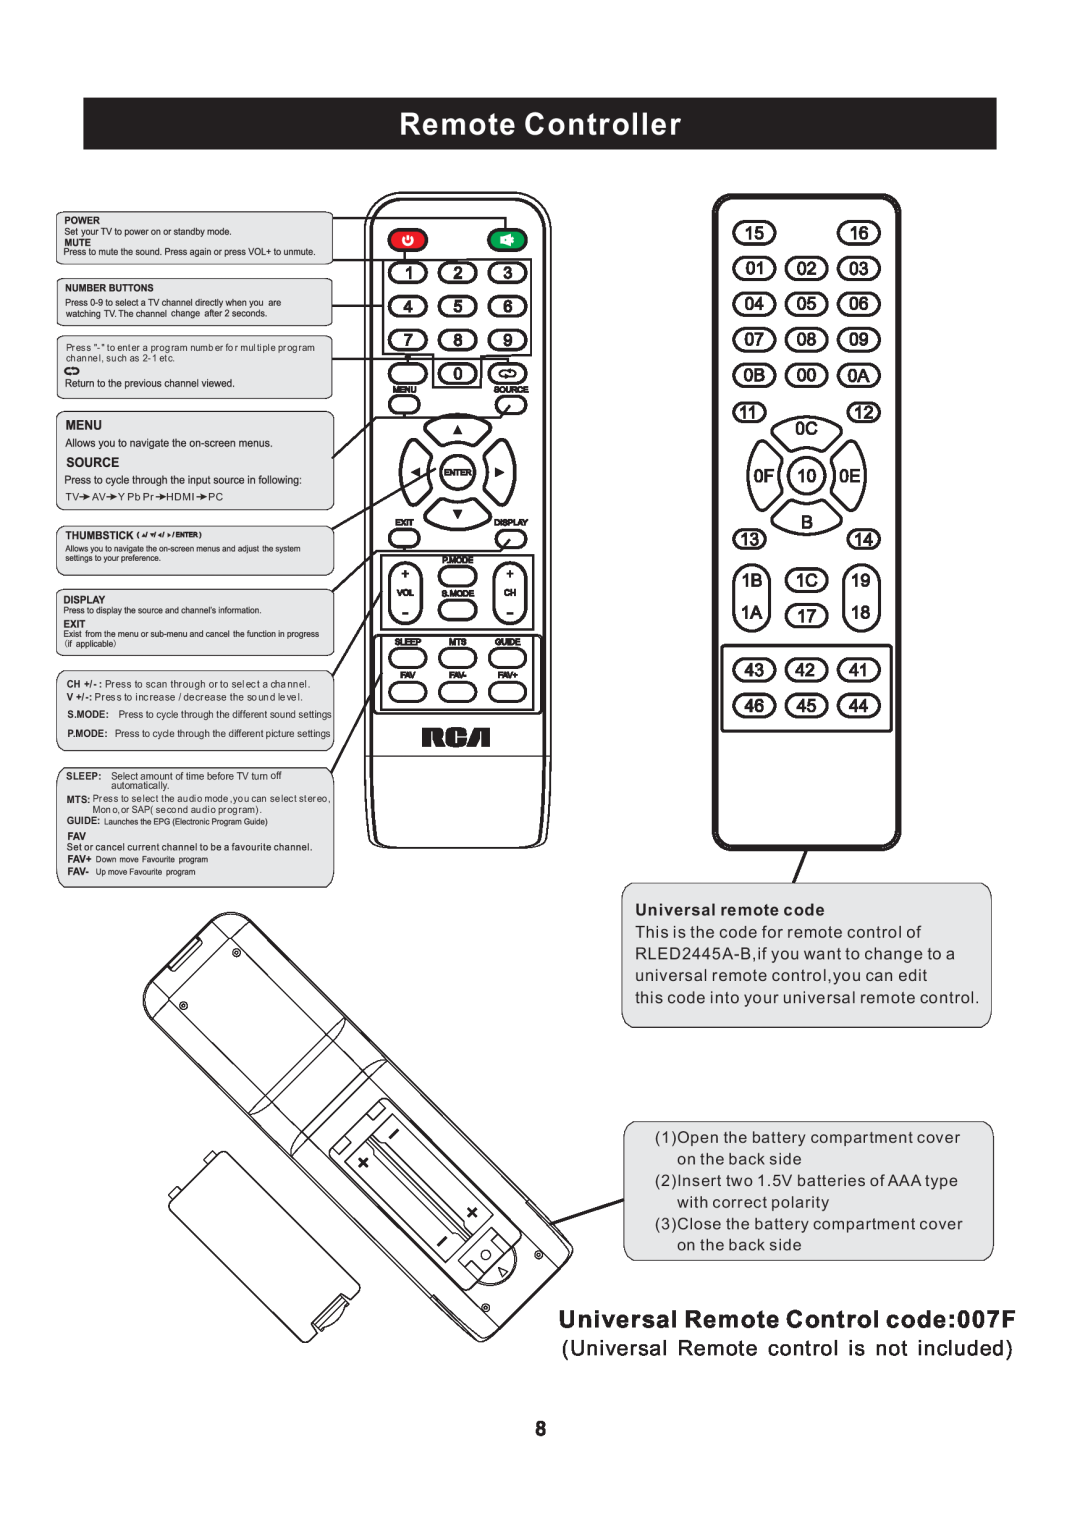 ProScan RLED2445A-B instruction manual Remote Controller, Universal Remote control is not included, 1 2 4 5 7 8, Guide 